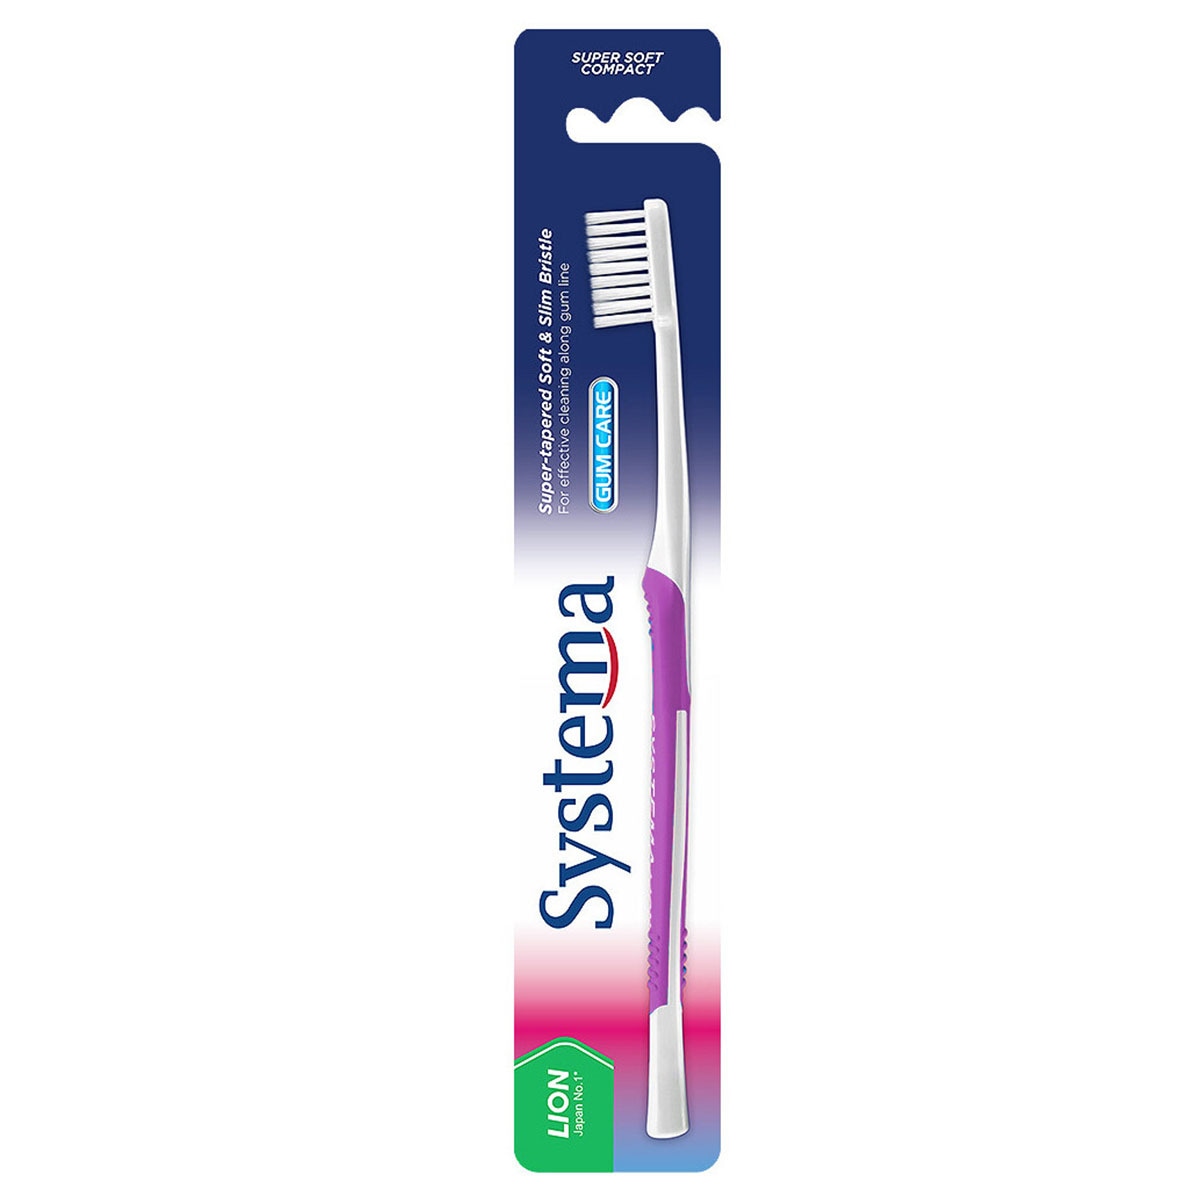 Systema Gum Care Super Soft Compact Toothbrush